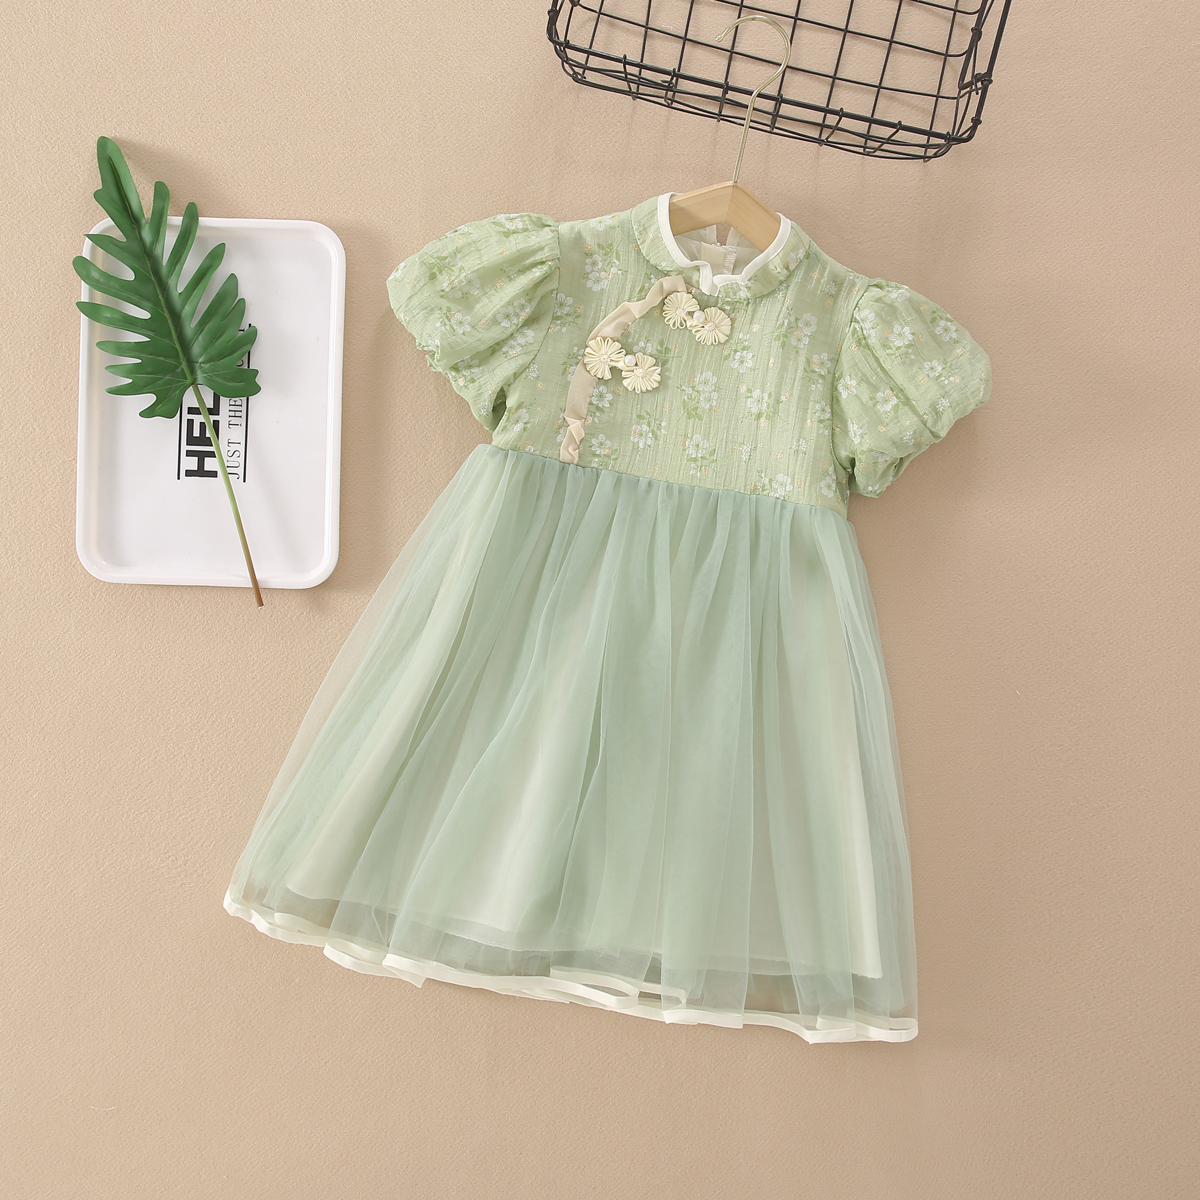 Light green little girls mesh dresses essential sustainable kids clothing qualified fast shipping